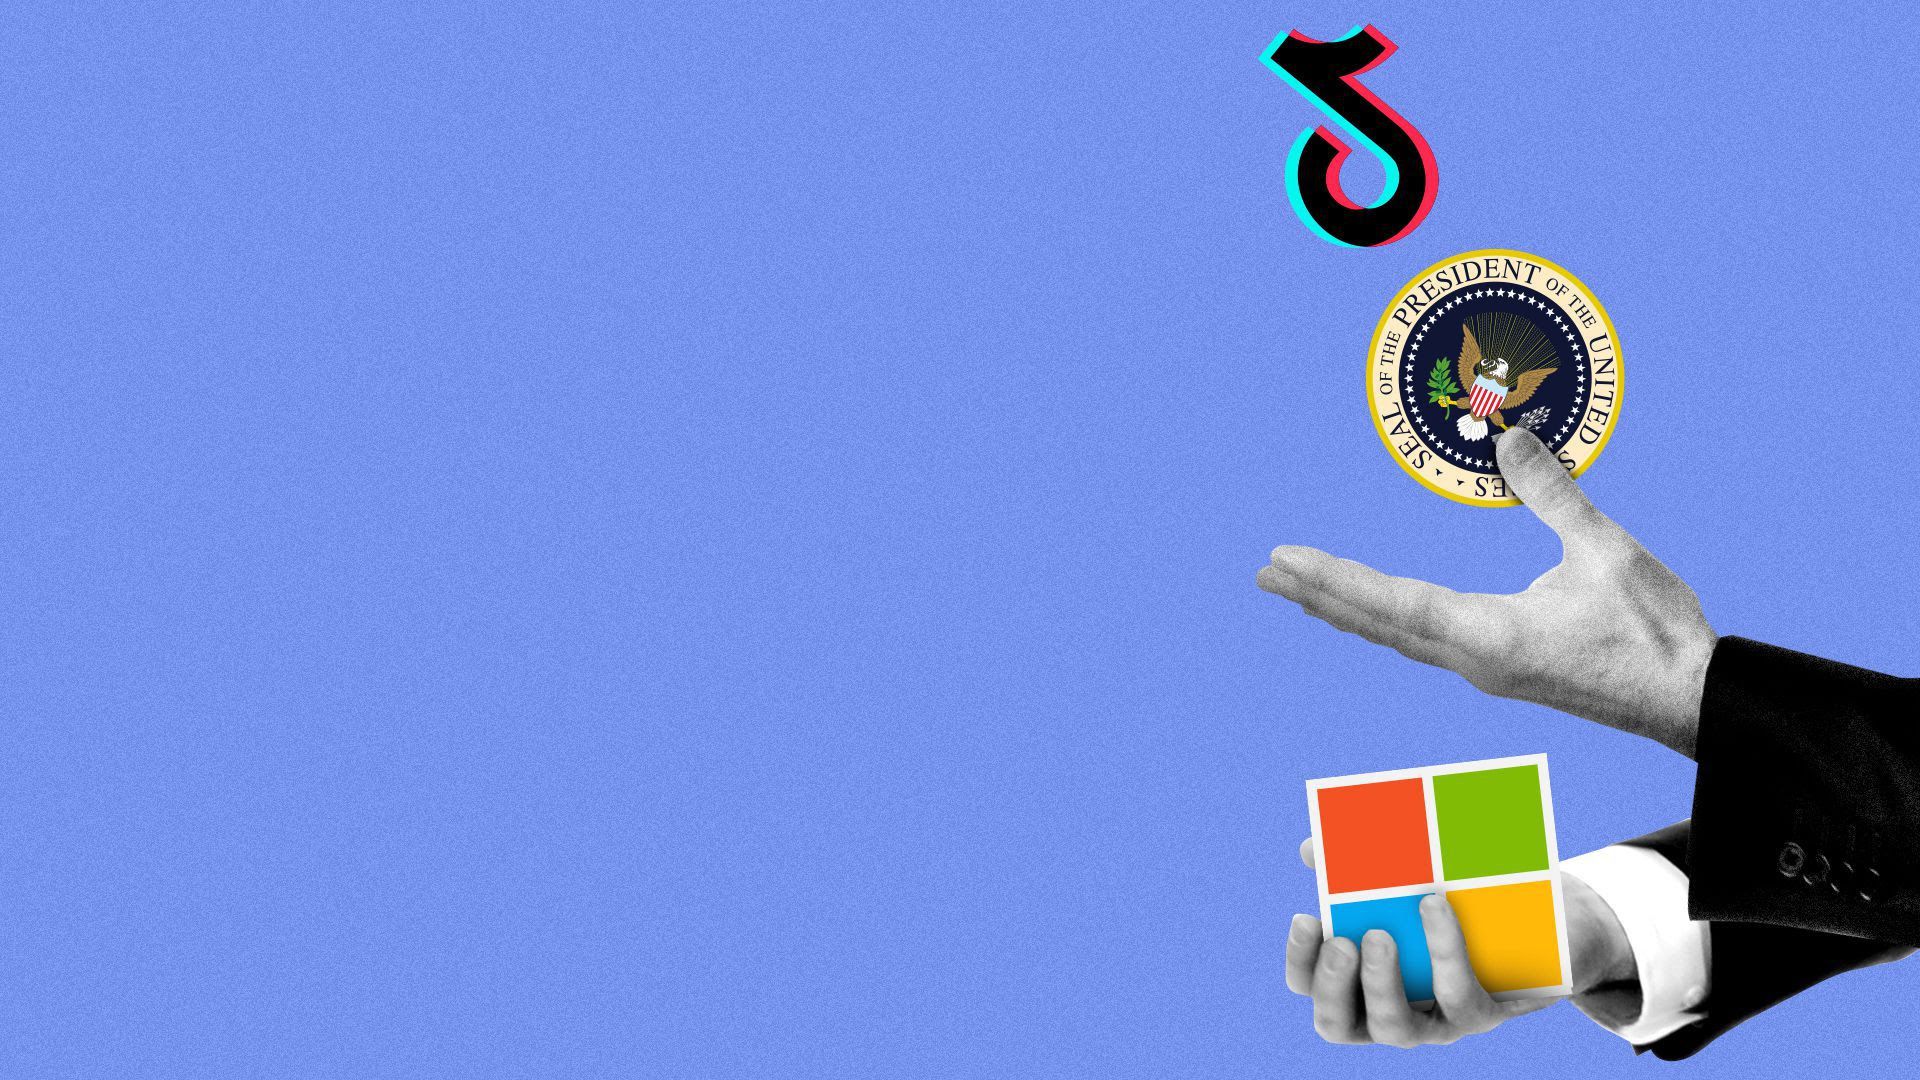 A hand holding the Tik Tok and Microsoft logos.